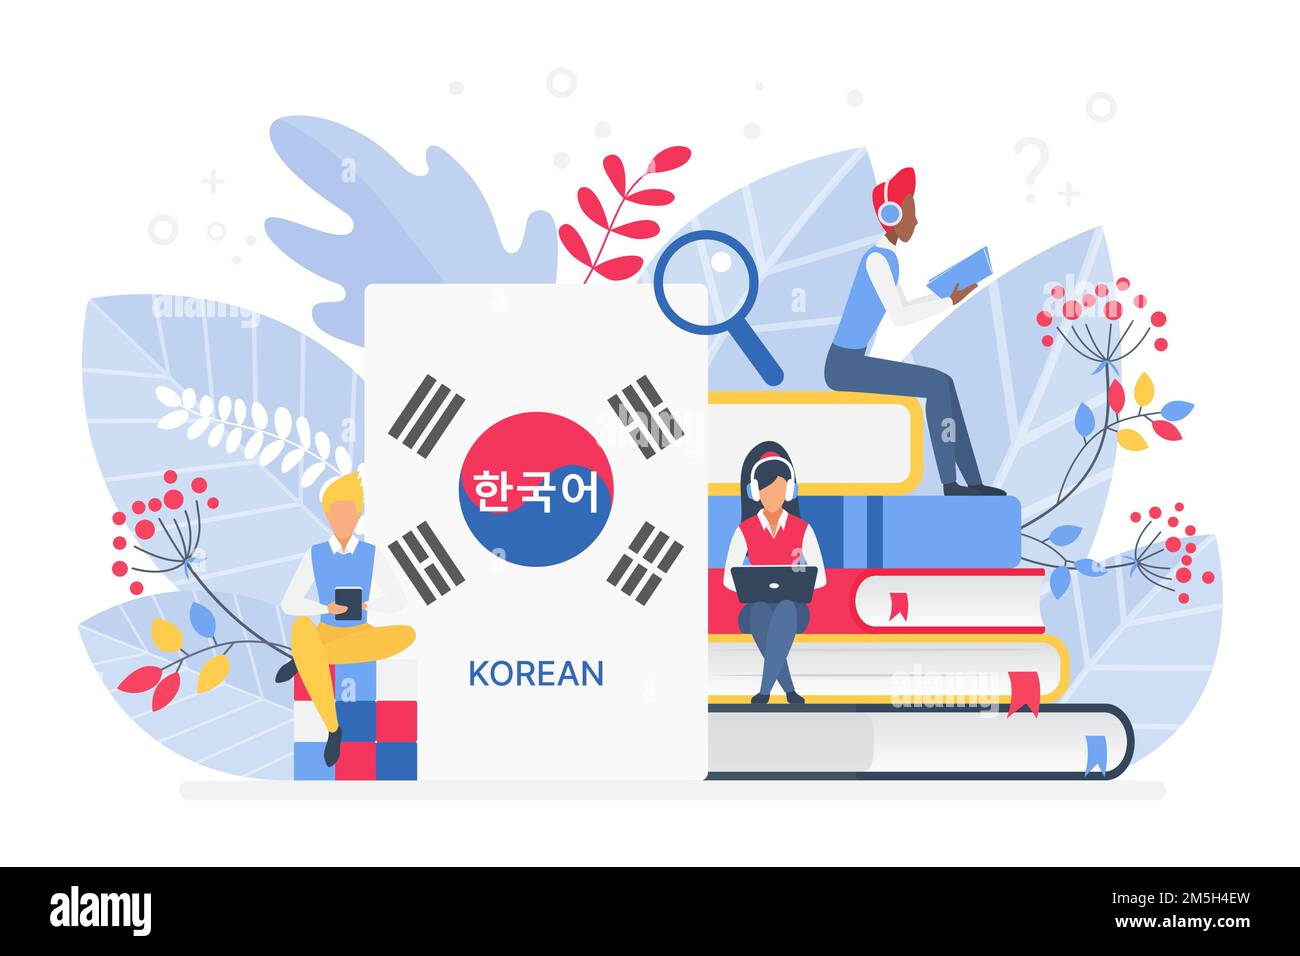 People learning Korean language vector illustration. Korea Distance education, online learning courses concept. Students reading books cartoon charact Stock Vector